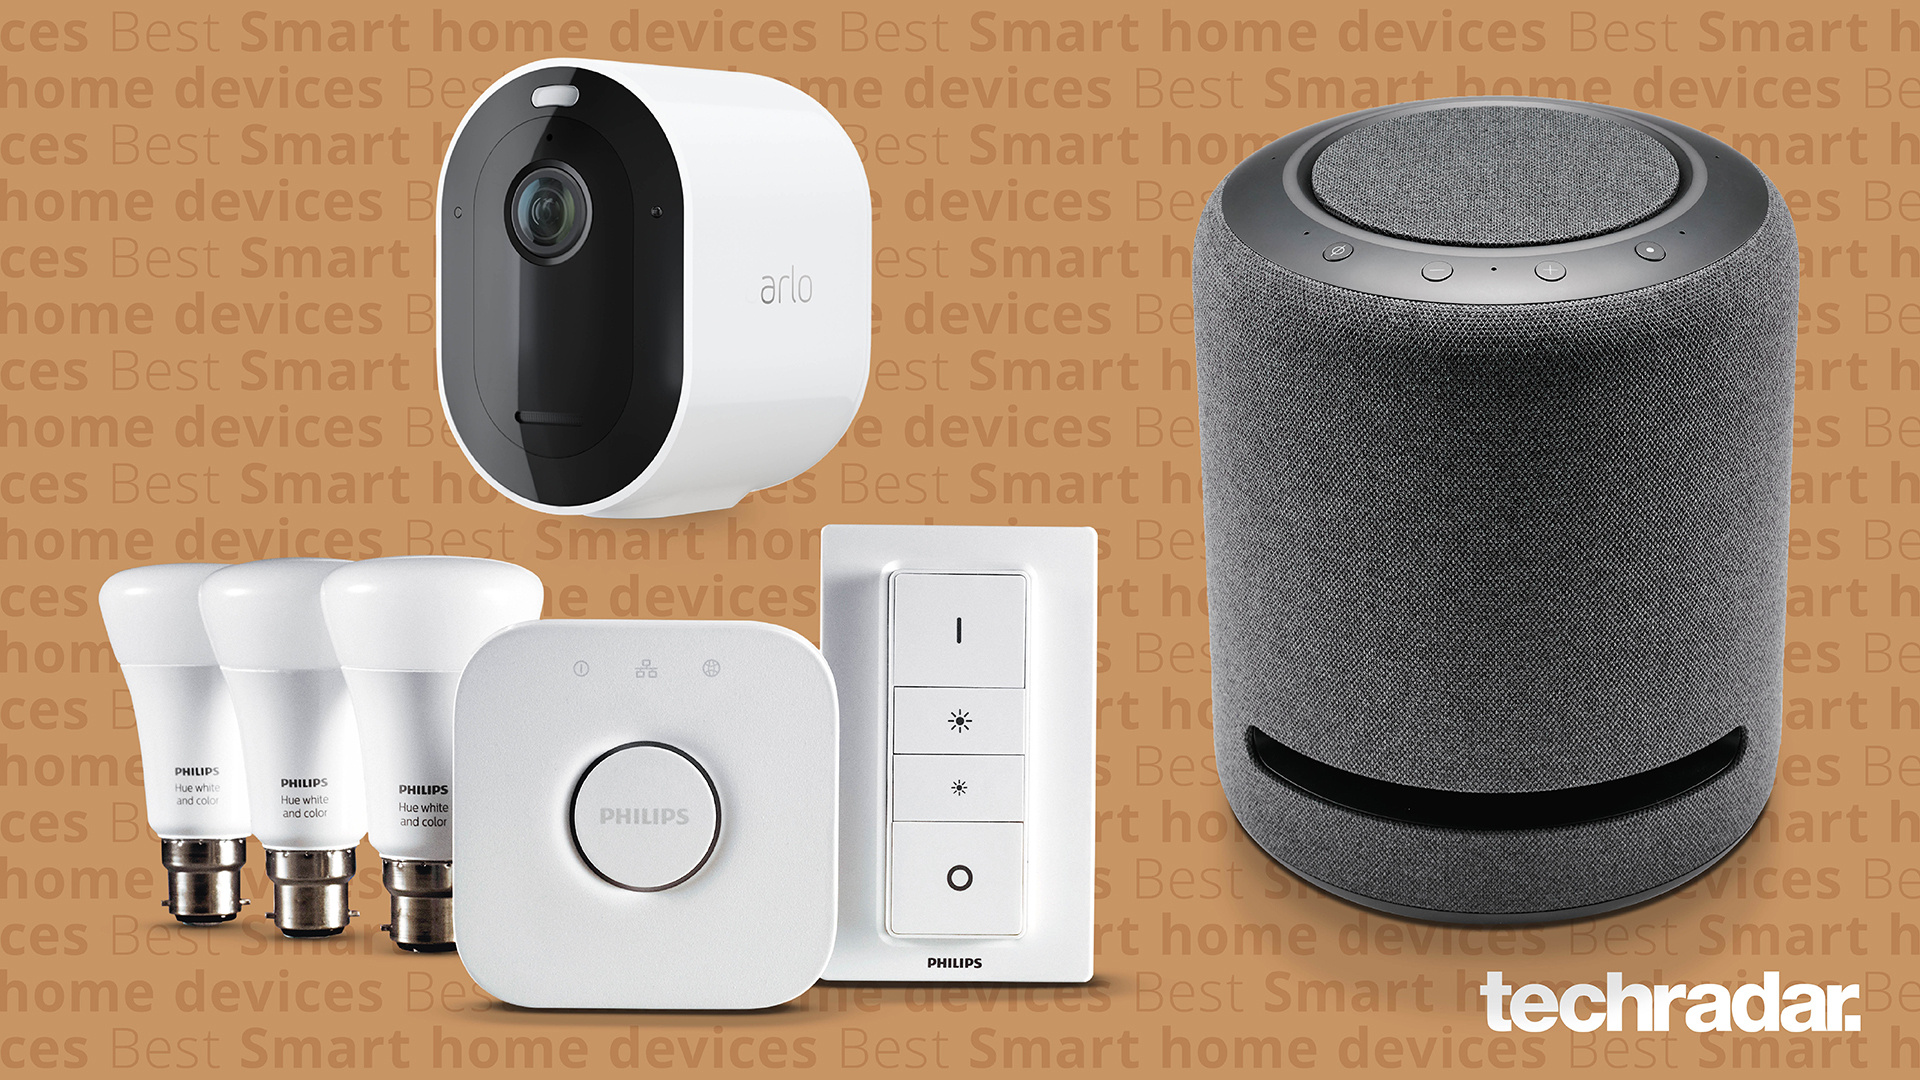 Home Automation Made Easy: Smart Devices You Need to Know About